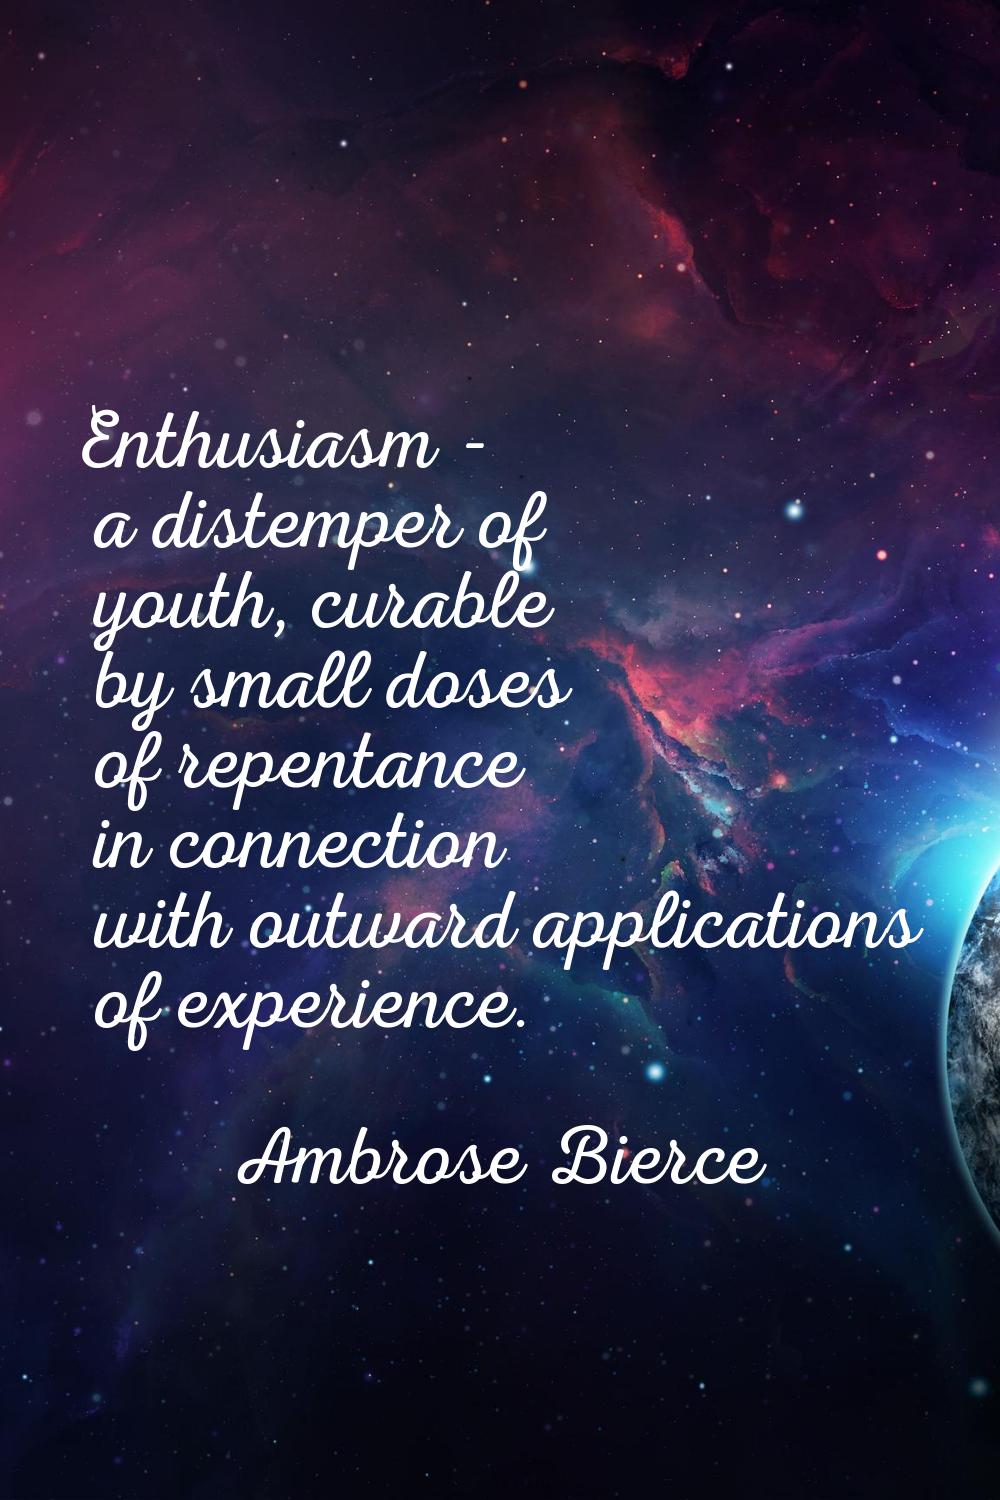 Enthusiasm - a distemper of youth, curable by small doses of repentance in connection with outward 